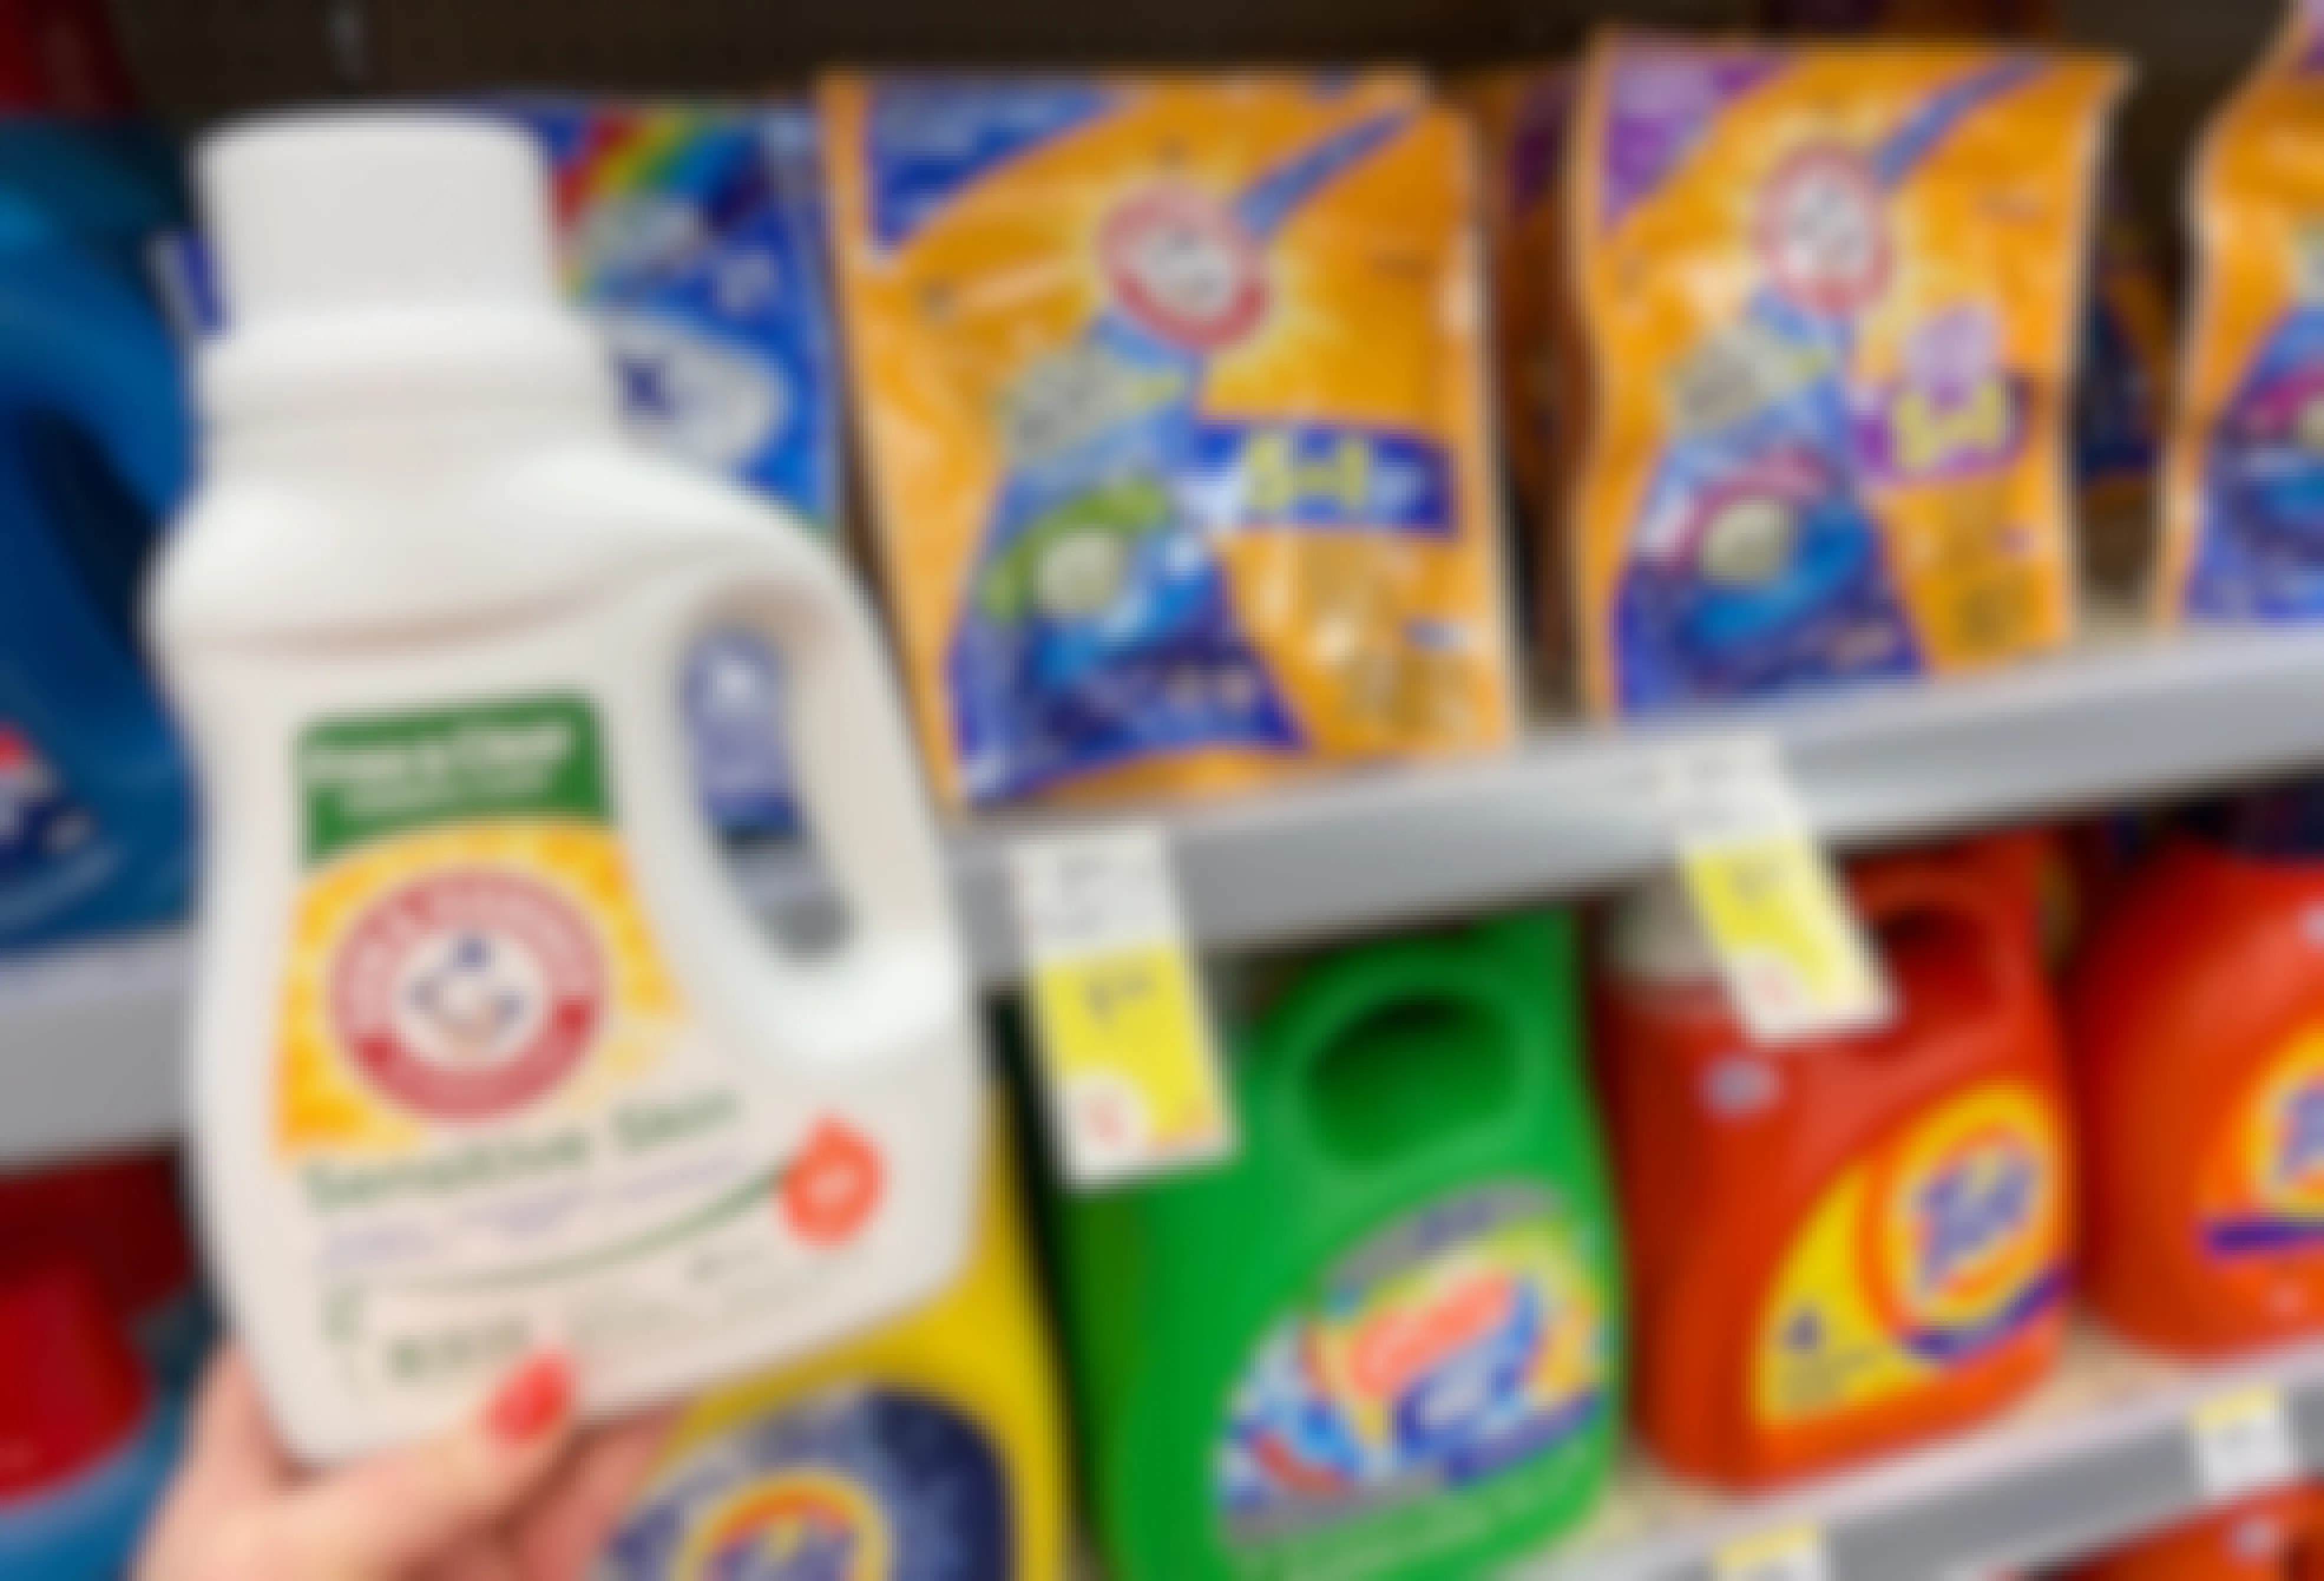 hand holding arm and hammer laundry detergent in front of a shelf with sale tags